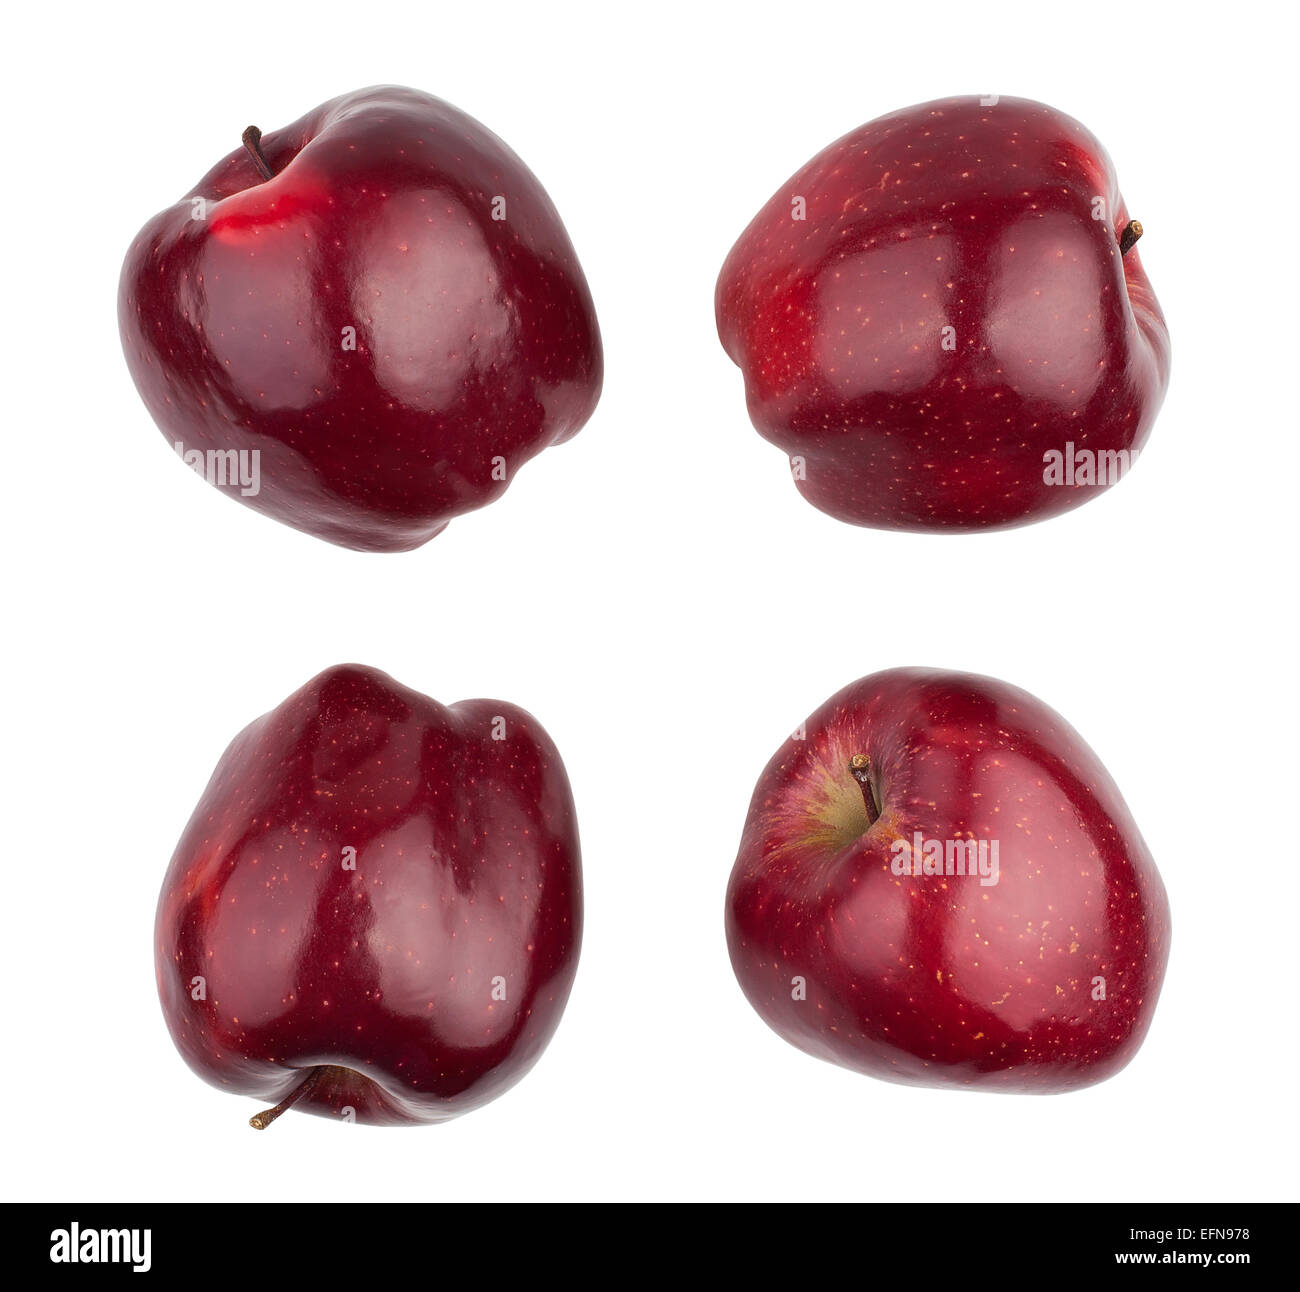 red apples isolated Stock Photo